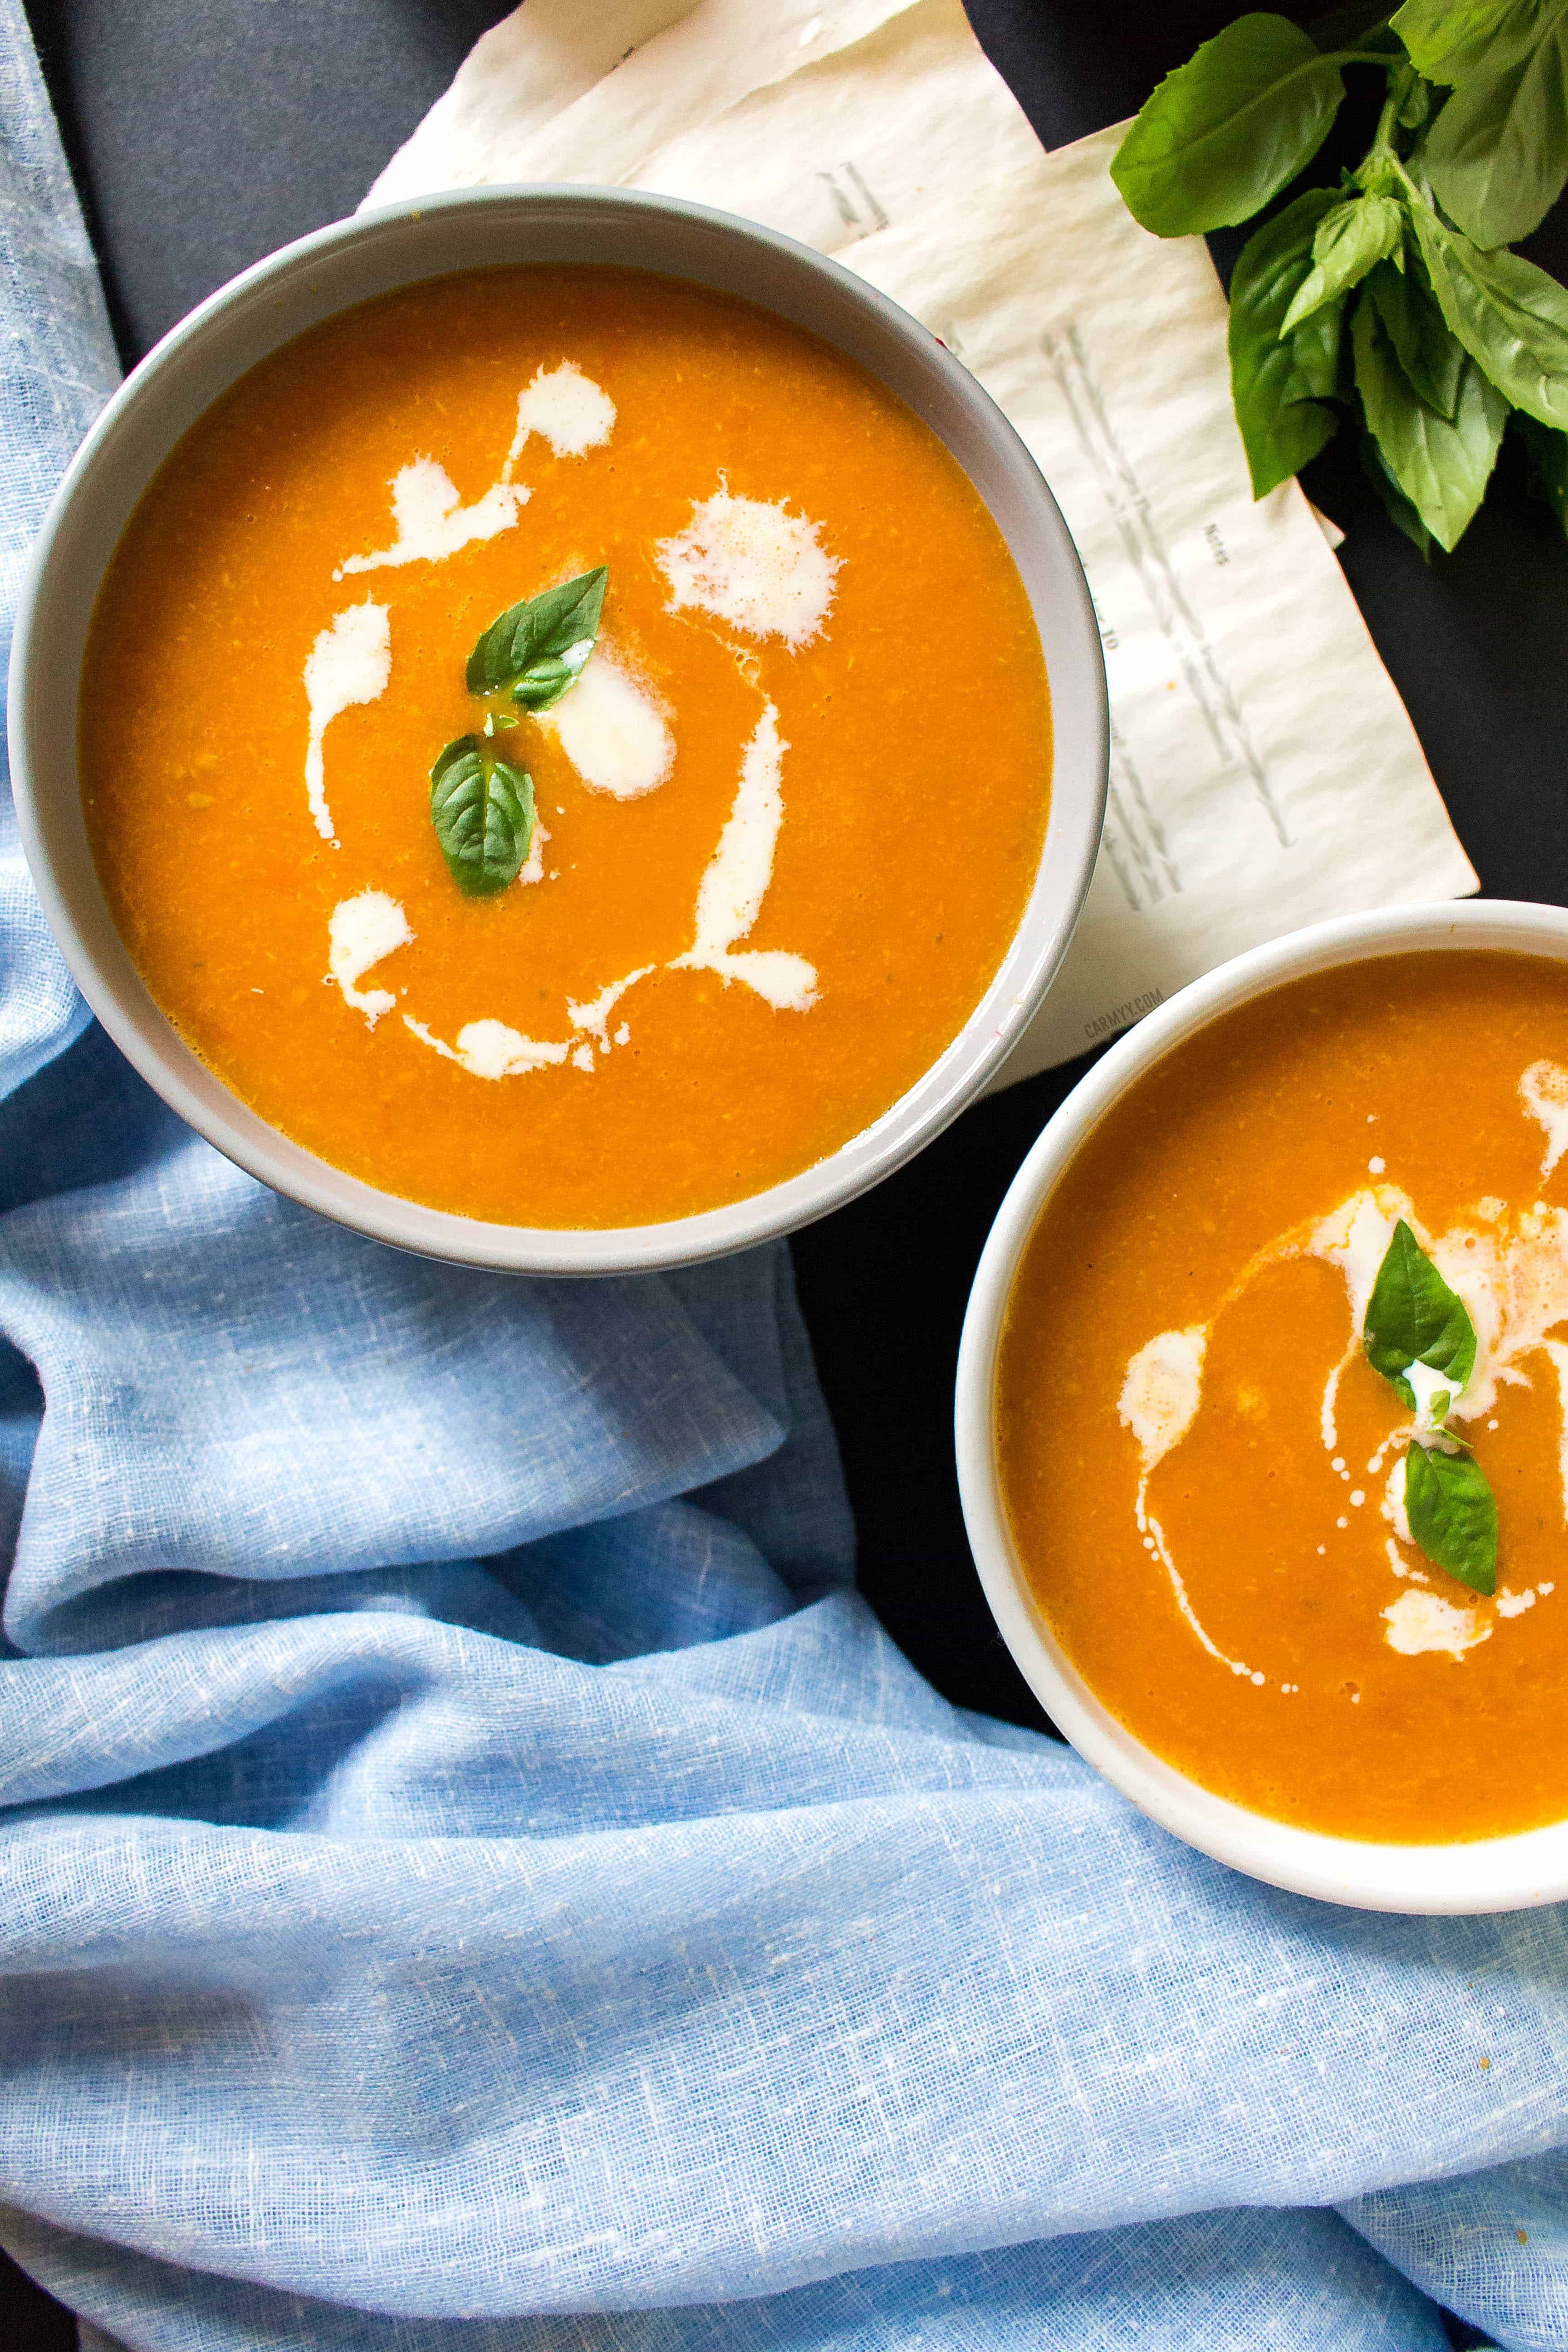 A rich and smooth delicious soup, this easy tomato garlic soup is flavourful and is only made with a handful of basic ingredients. This easy tomato and garlic soup can be made in the Instant Pot or stove top.